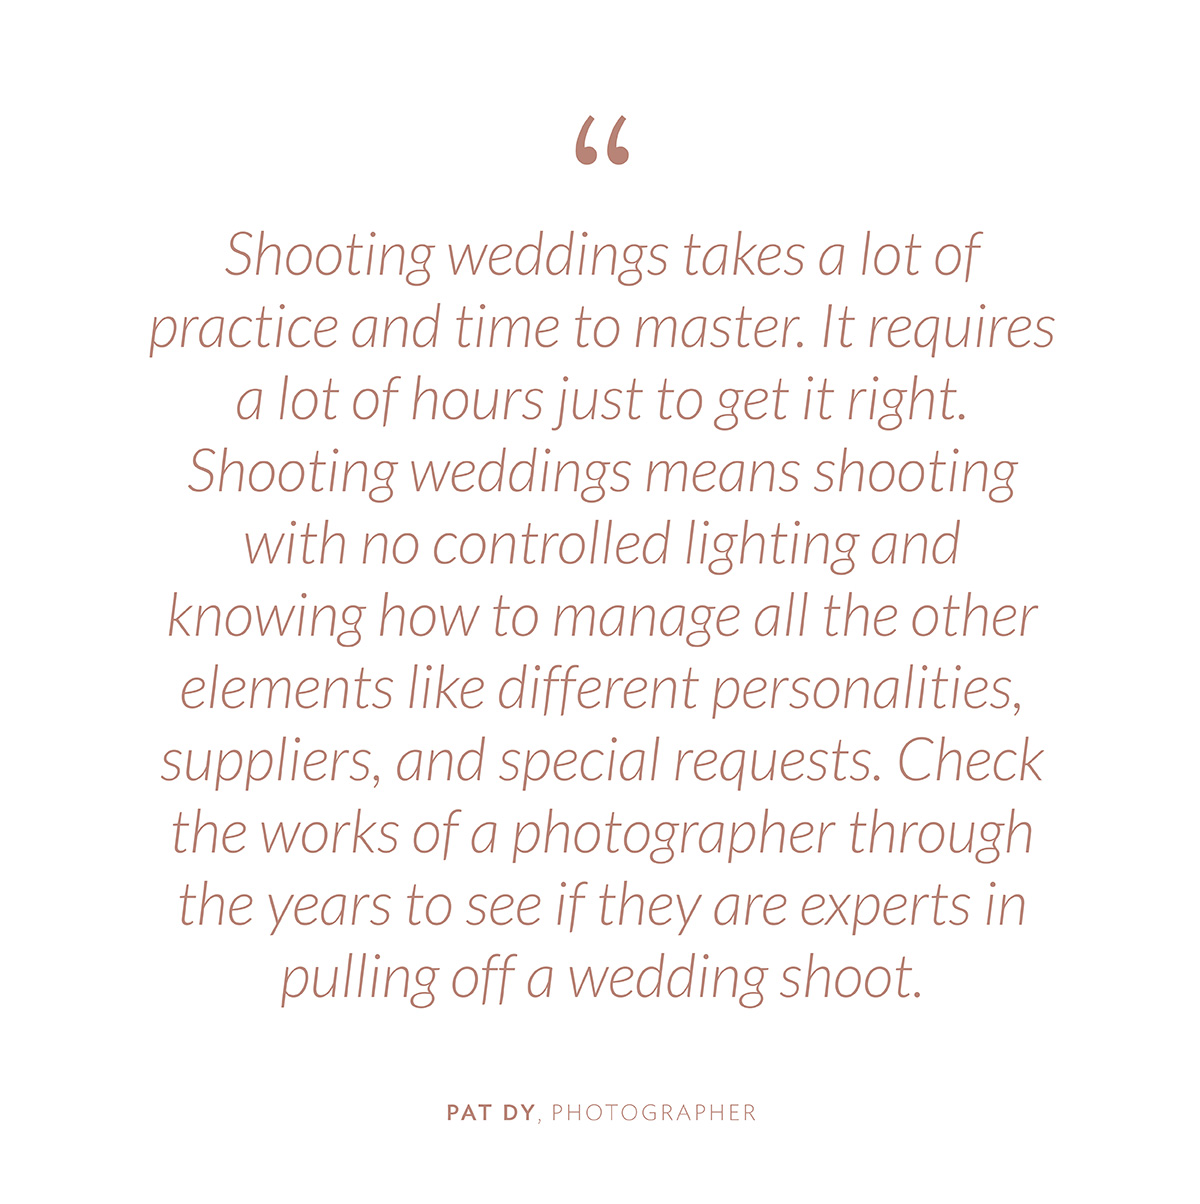 “Shooting weddings takes a lot of practice and time to master. It requires a lot of hours just to get it right. Shooting weddings means shooting with no controlled lighting and knowing how to manage all the other elements like different personalities, suppliers, and special requests. Check the works of a photographer through the years to see if they are experts in pulling off a wedding shoot.”-Pat Dy